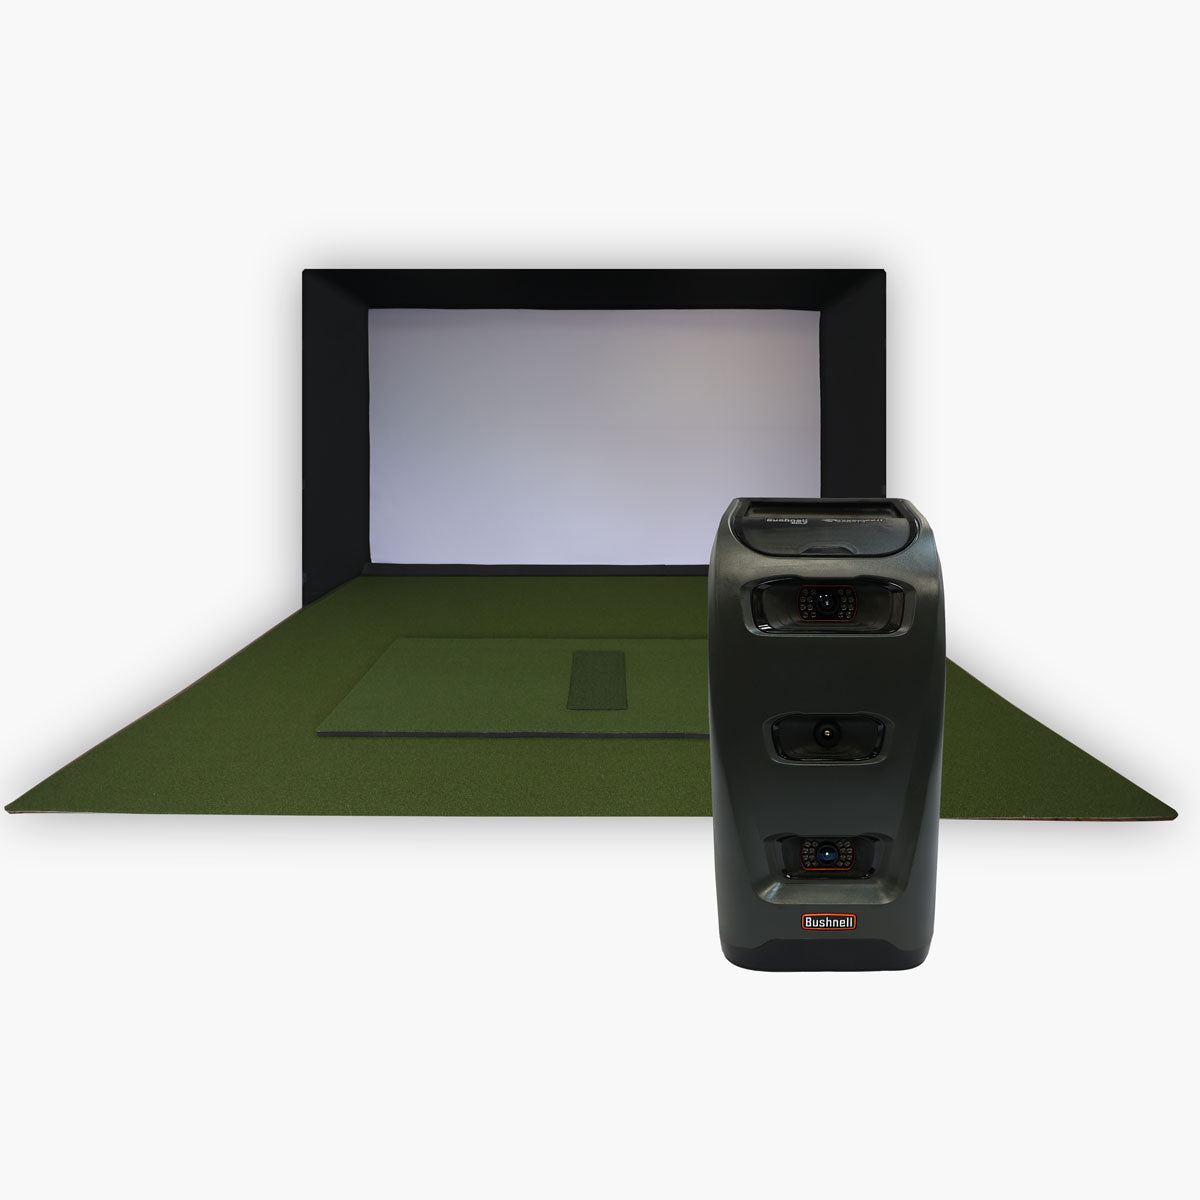 Bushnell Launch Pro Simulator Package